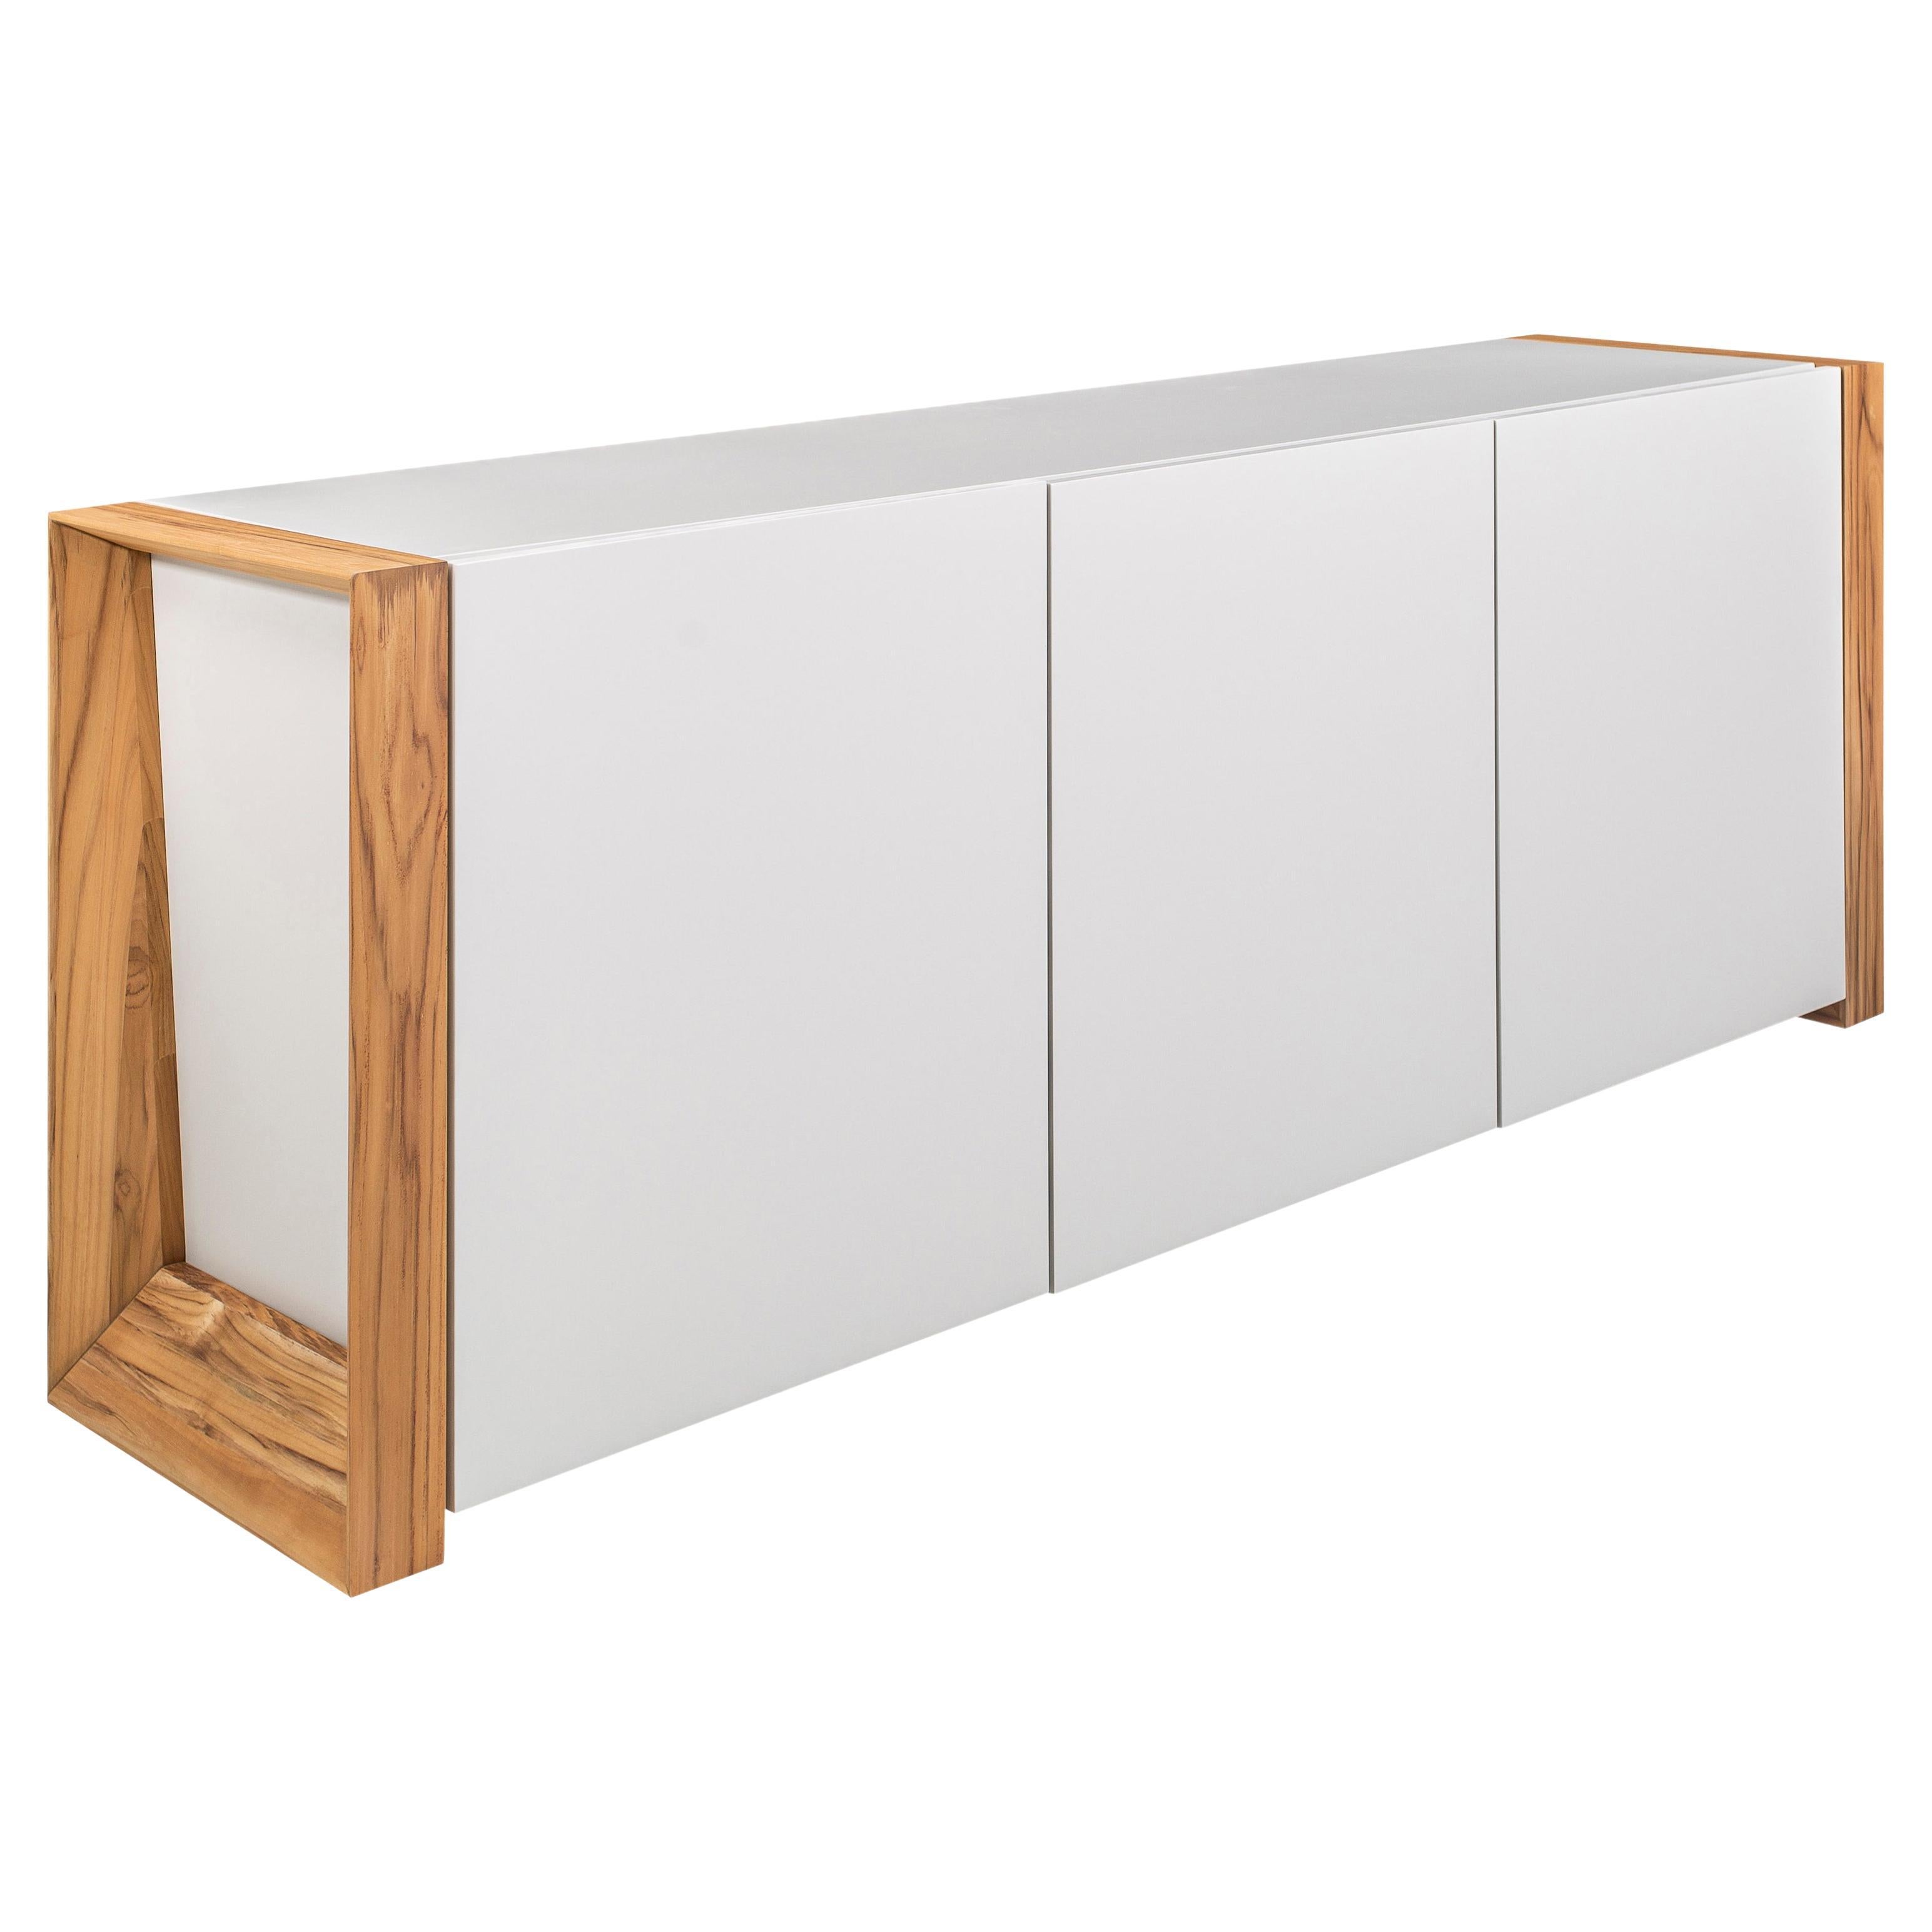 Masp Sideboard in White Finish and Teak Wood Finish End Frames